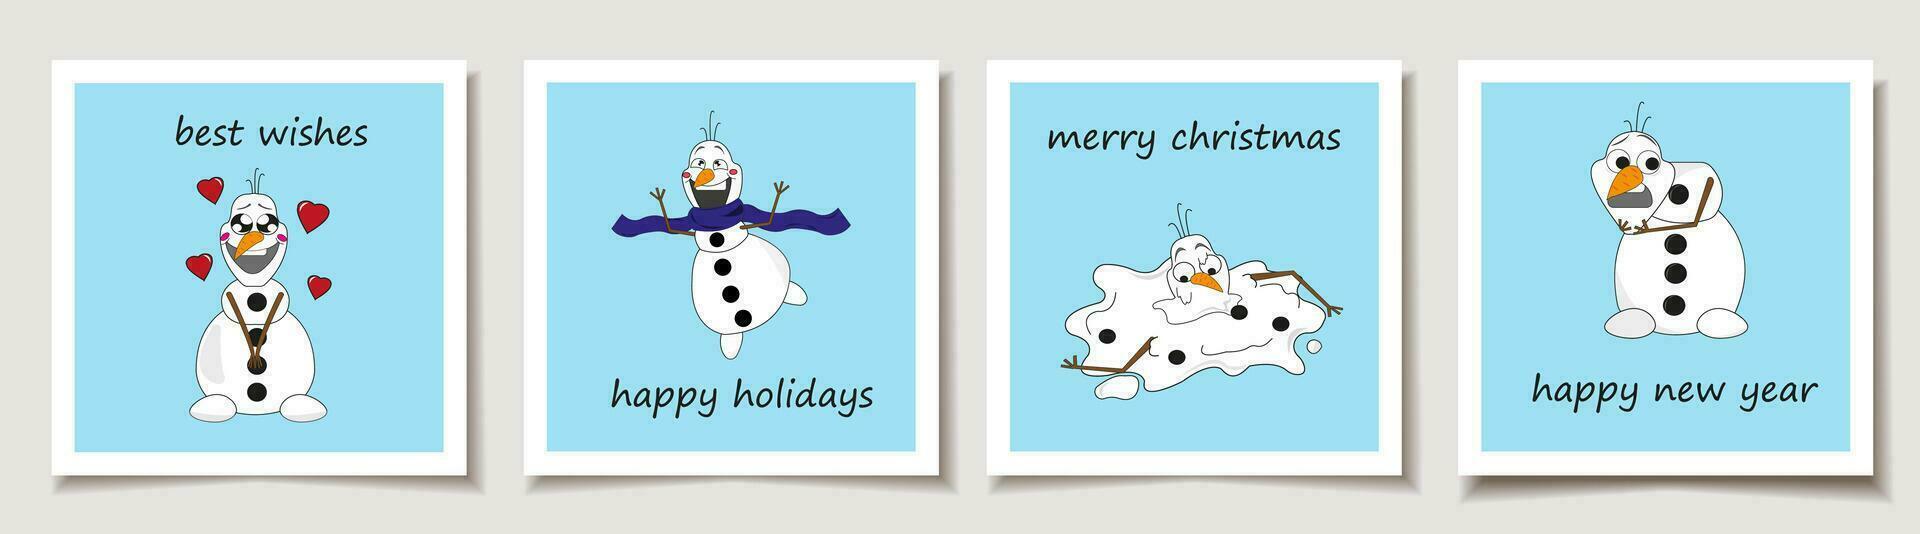 Christmas vector gift card or tag set Cute Cartoon Christmas snowmen characters. Cute ladies. Merry christmas lettering, best wishes